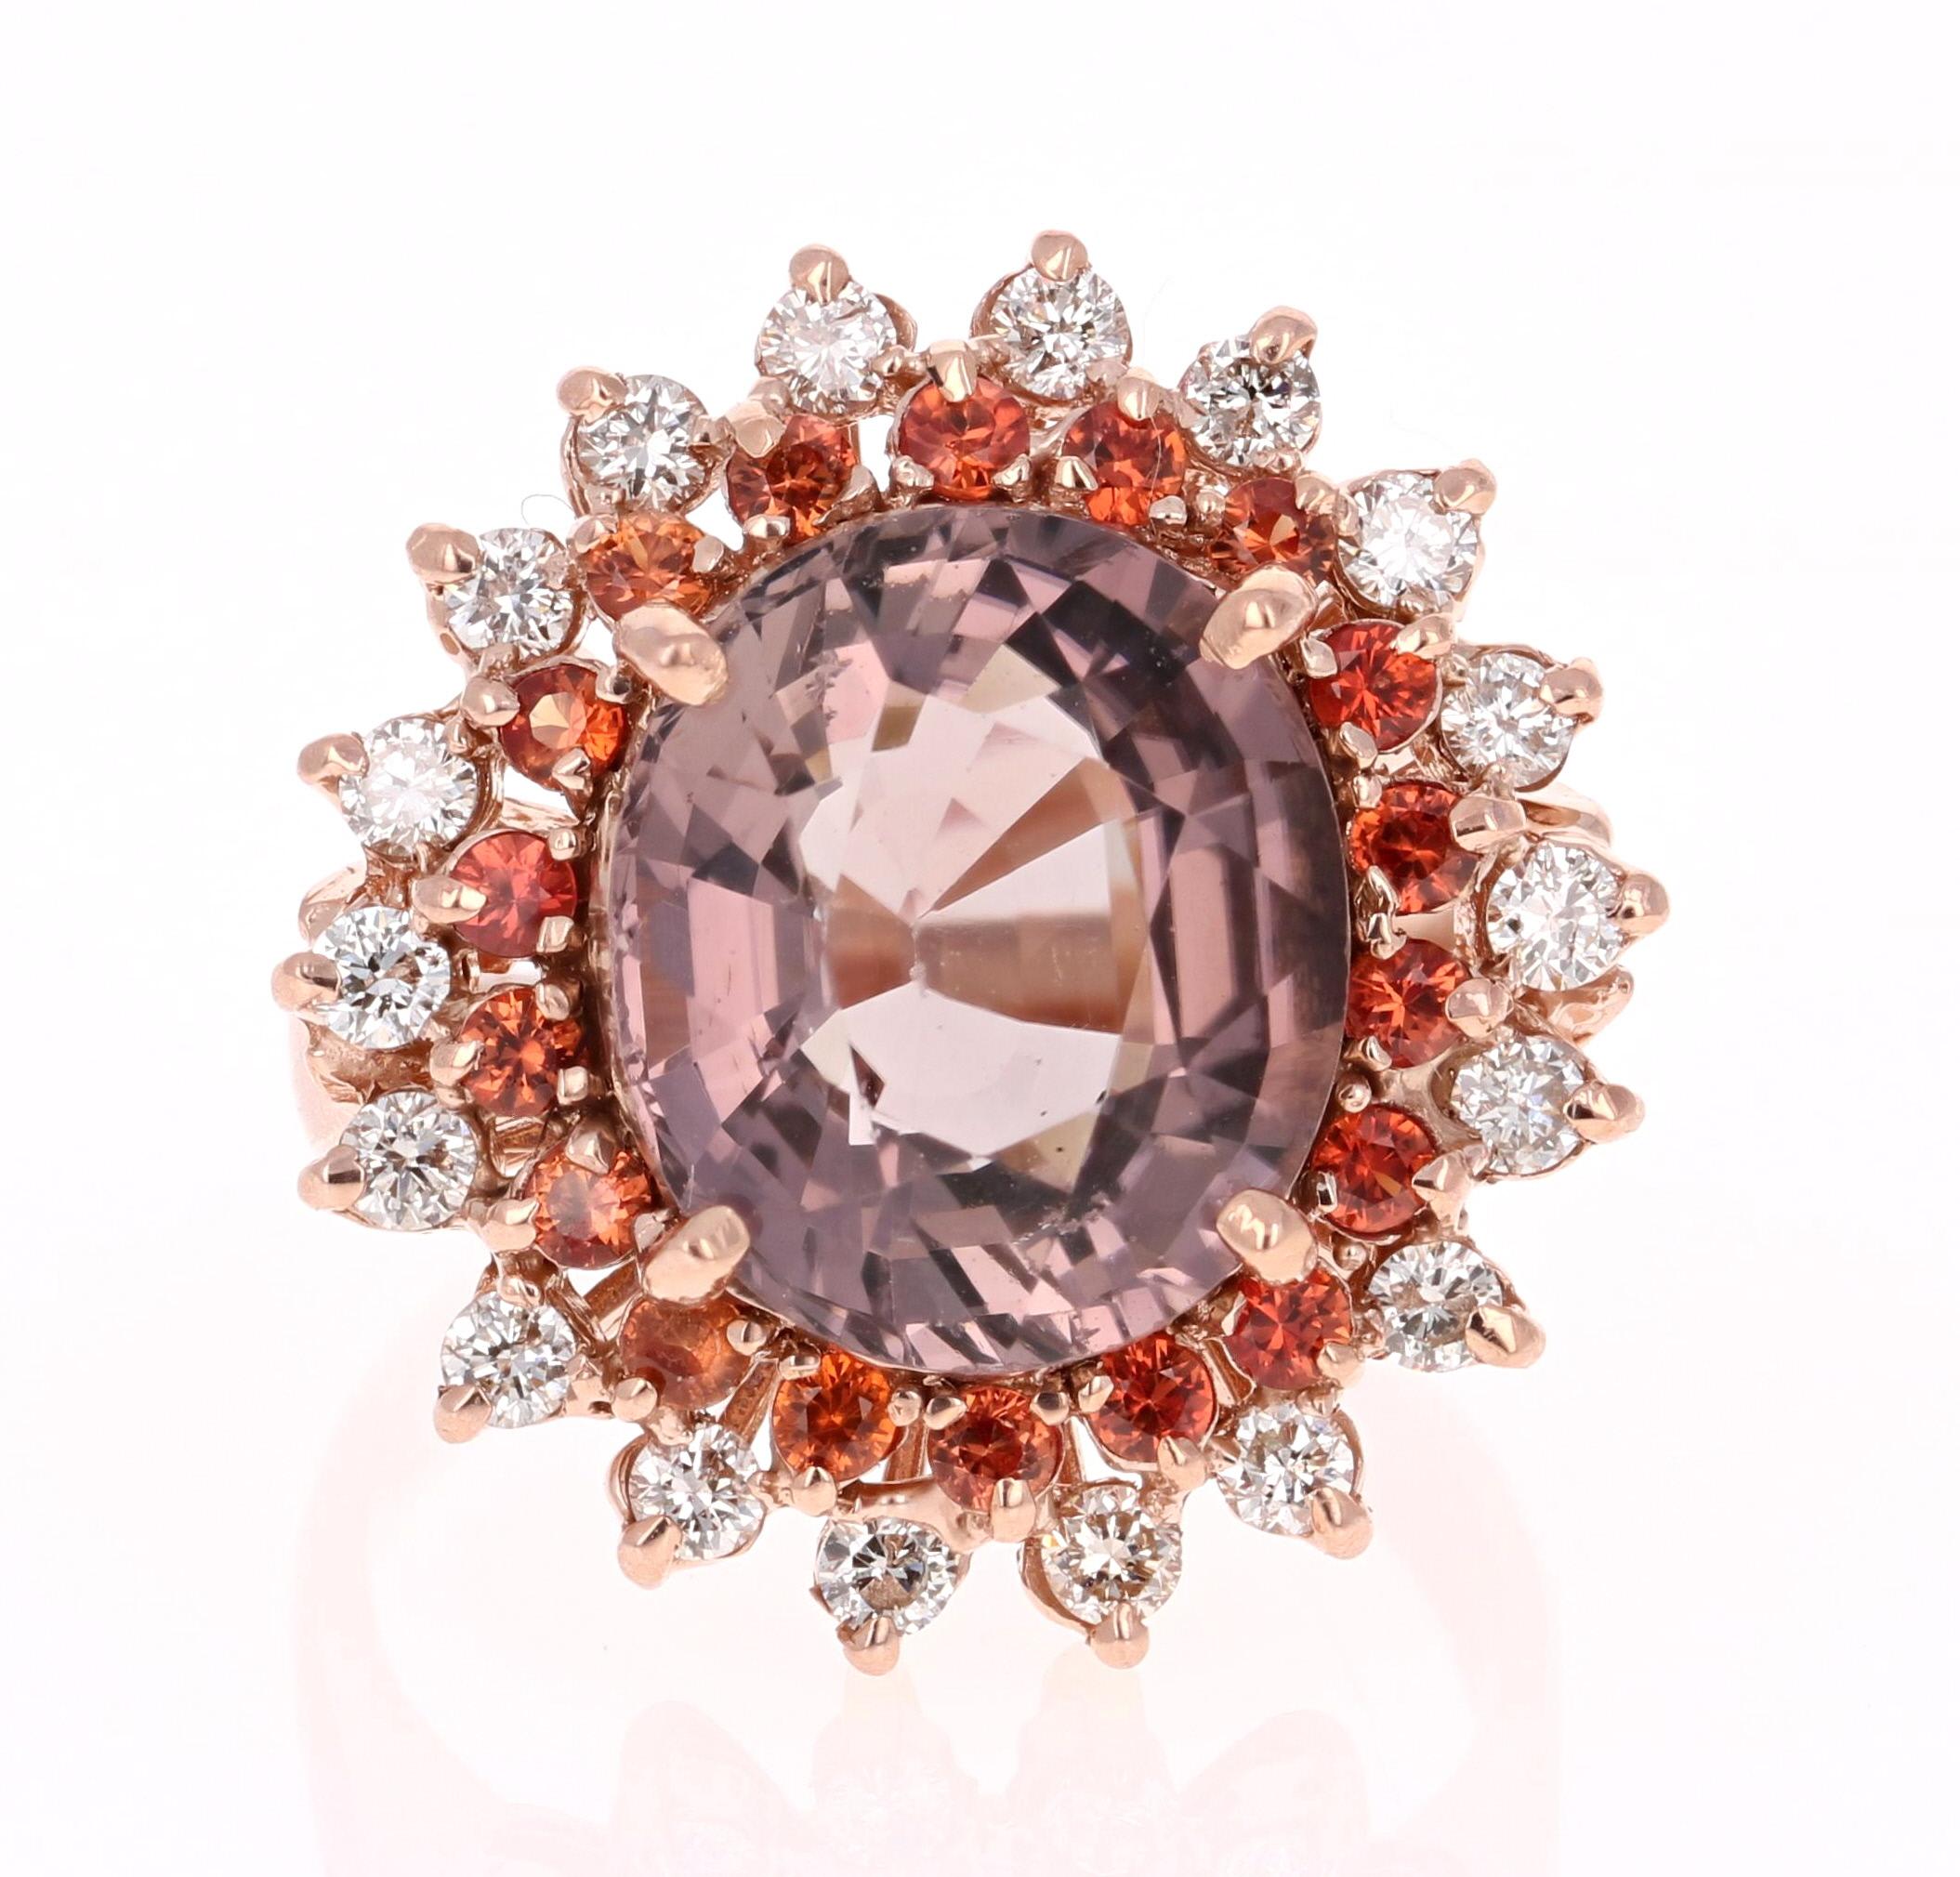 Stunning and uniquely designed 7.17 Carat Tourmaline, Sapphire and Diamond Rose Gold Cocktail Ring!

This ring has a 5.98 carat Oval Cut Tourmaline that is set in the center of the ring and is surrounded by 18 Round Cut Orange Sapphires that weigh